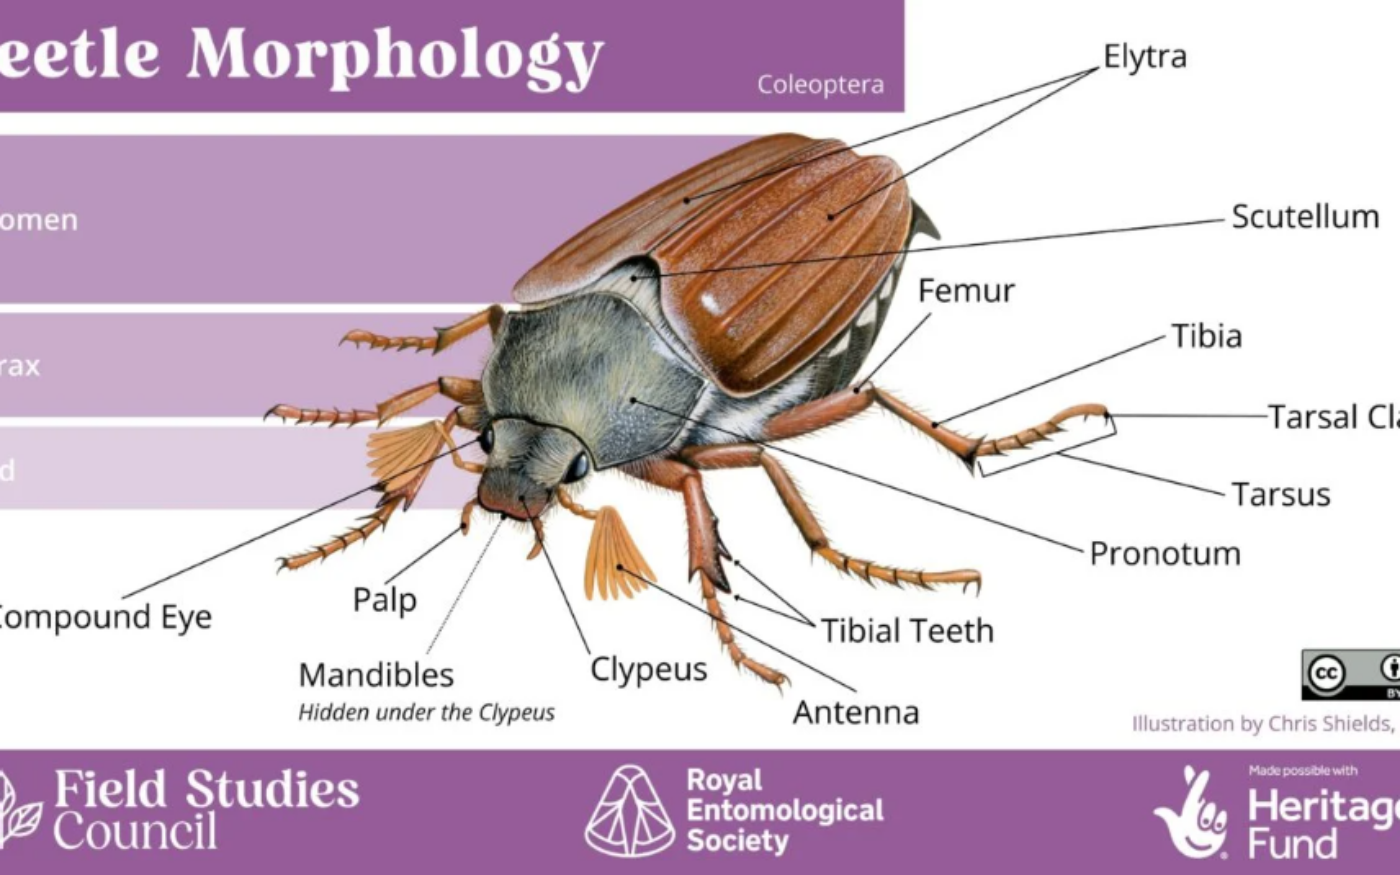 Infographic explaining beetle morphology, by Field Studies Council, Royal Entomological Society and Heritage Fund. Illustration by Chris Shields.